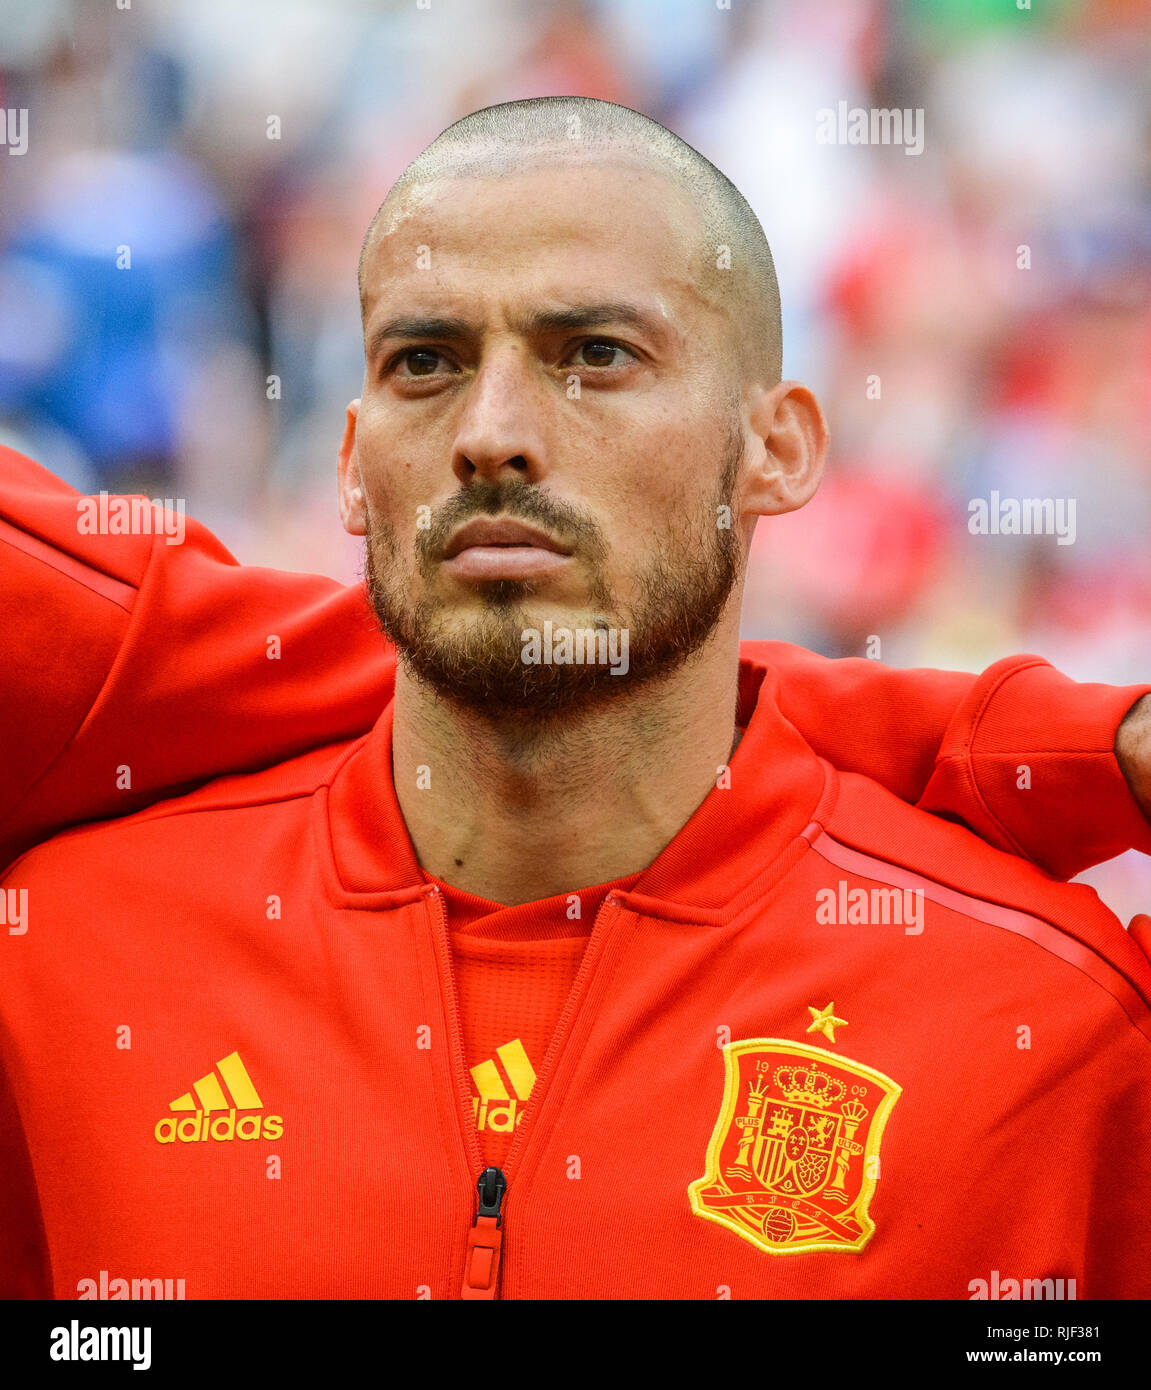 Moscow, Russia - July 1, 2018. Spain national football team midfielder David Silva before FIFA World Cup 2018 Round of 16 match Spain vs Russia. Stock Photo